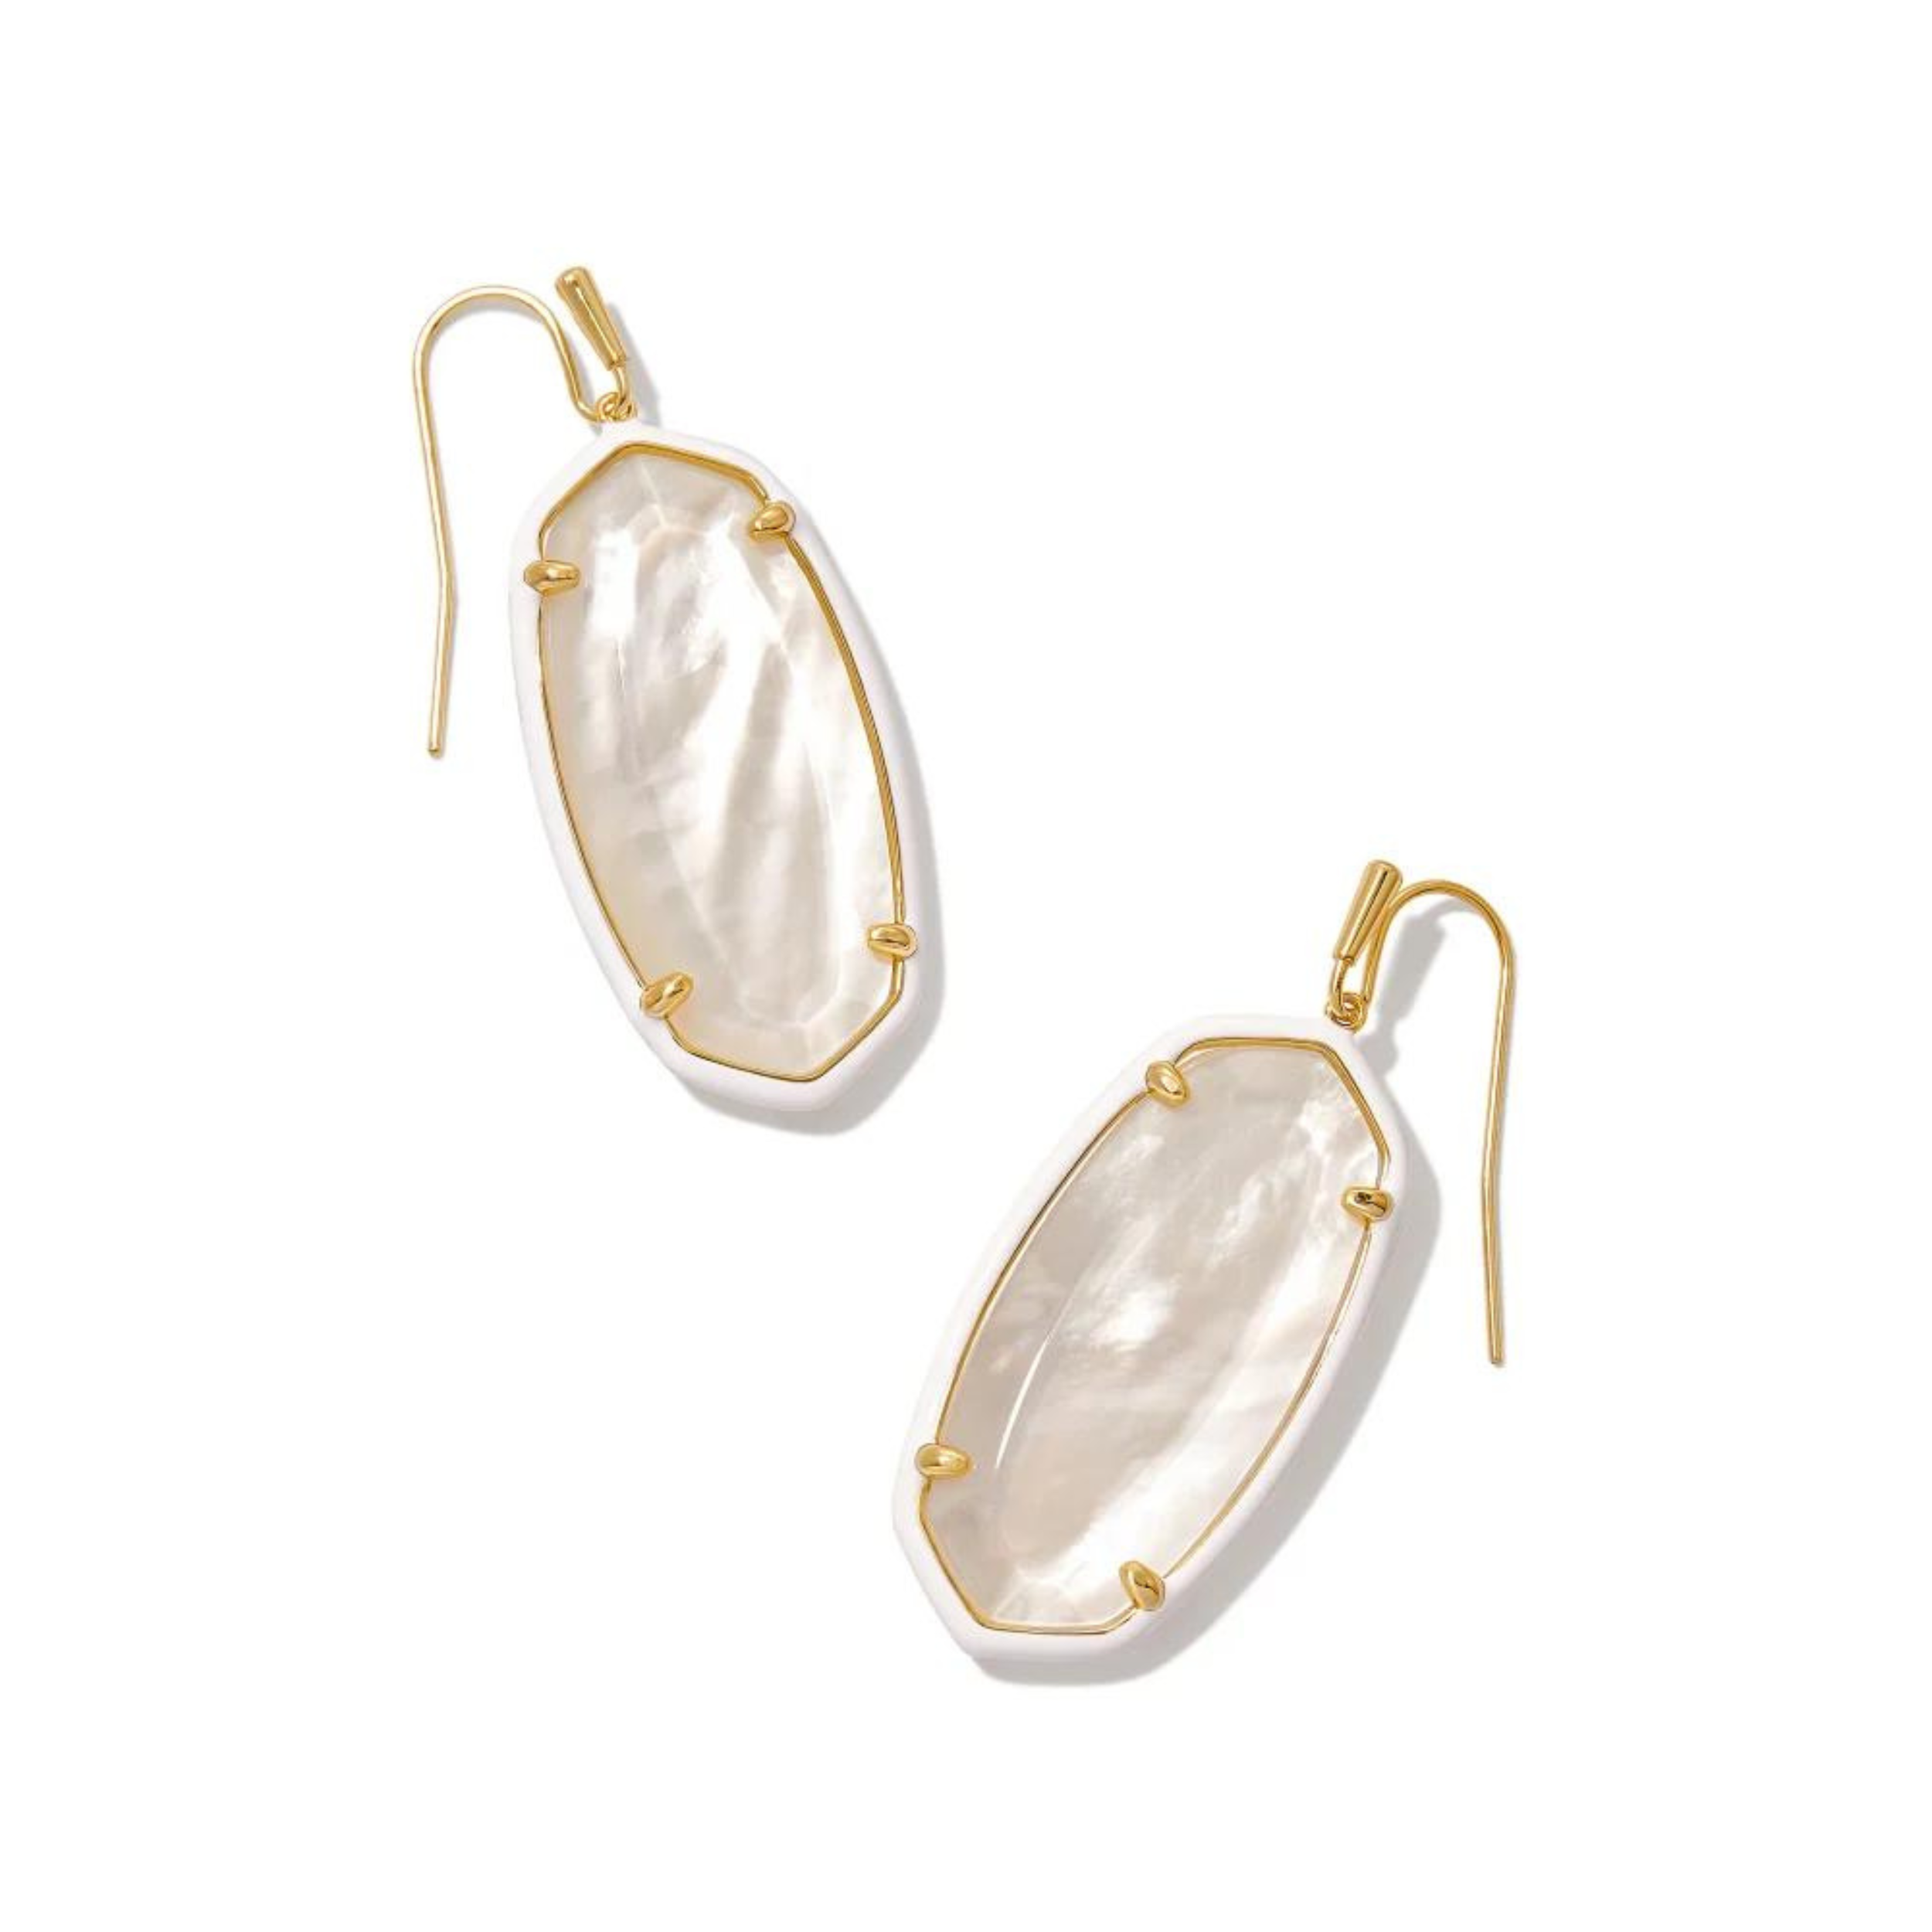 Pictured on a white background is a pair of oval shaped gold and white earrings. These earrings include a gold fish hook. 